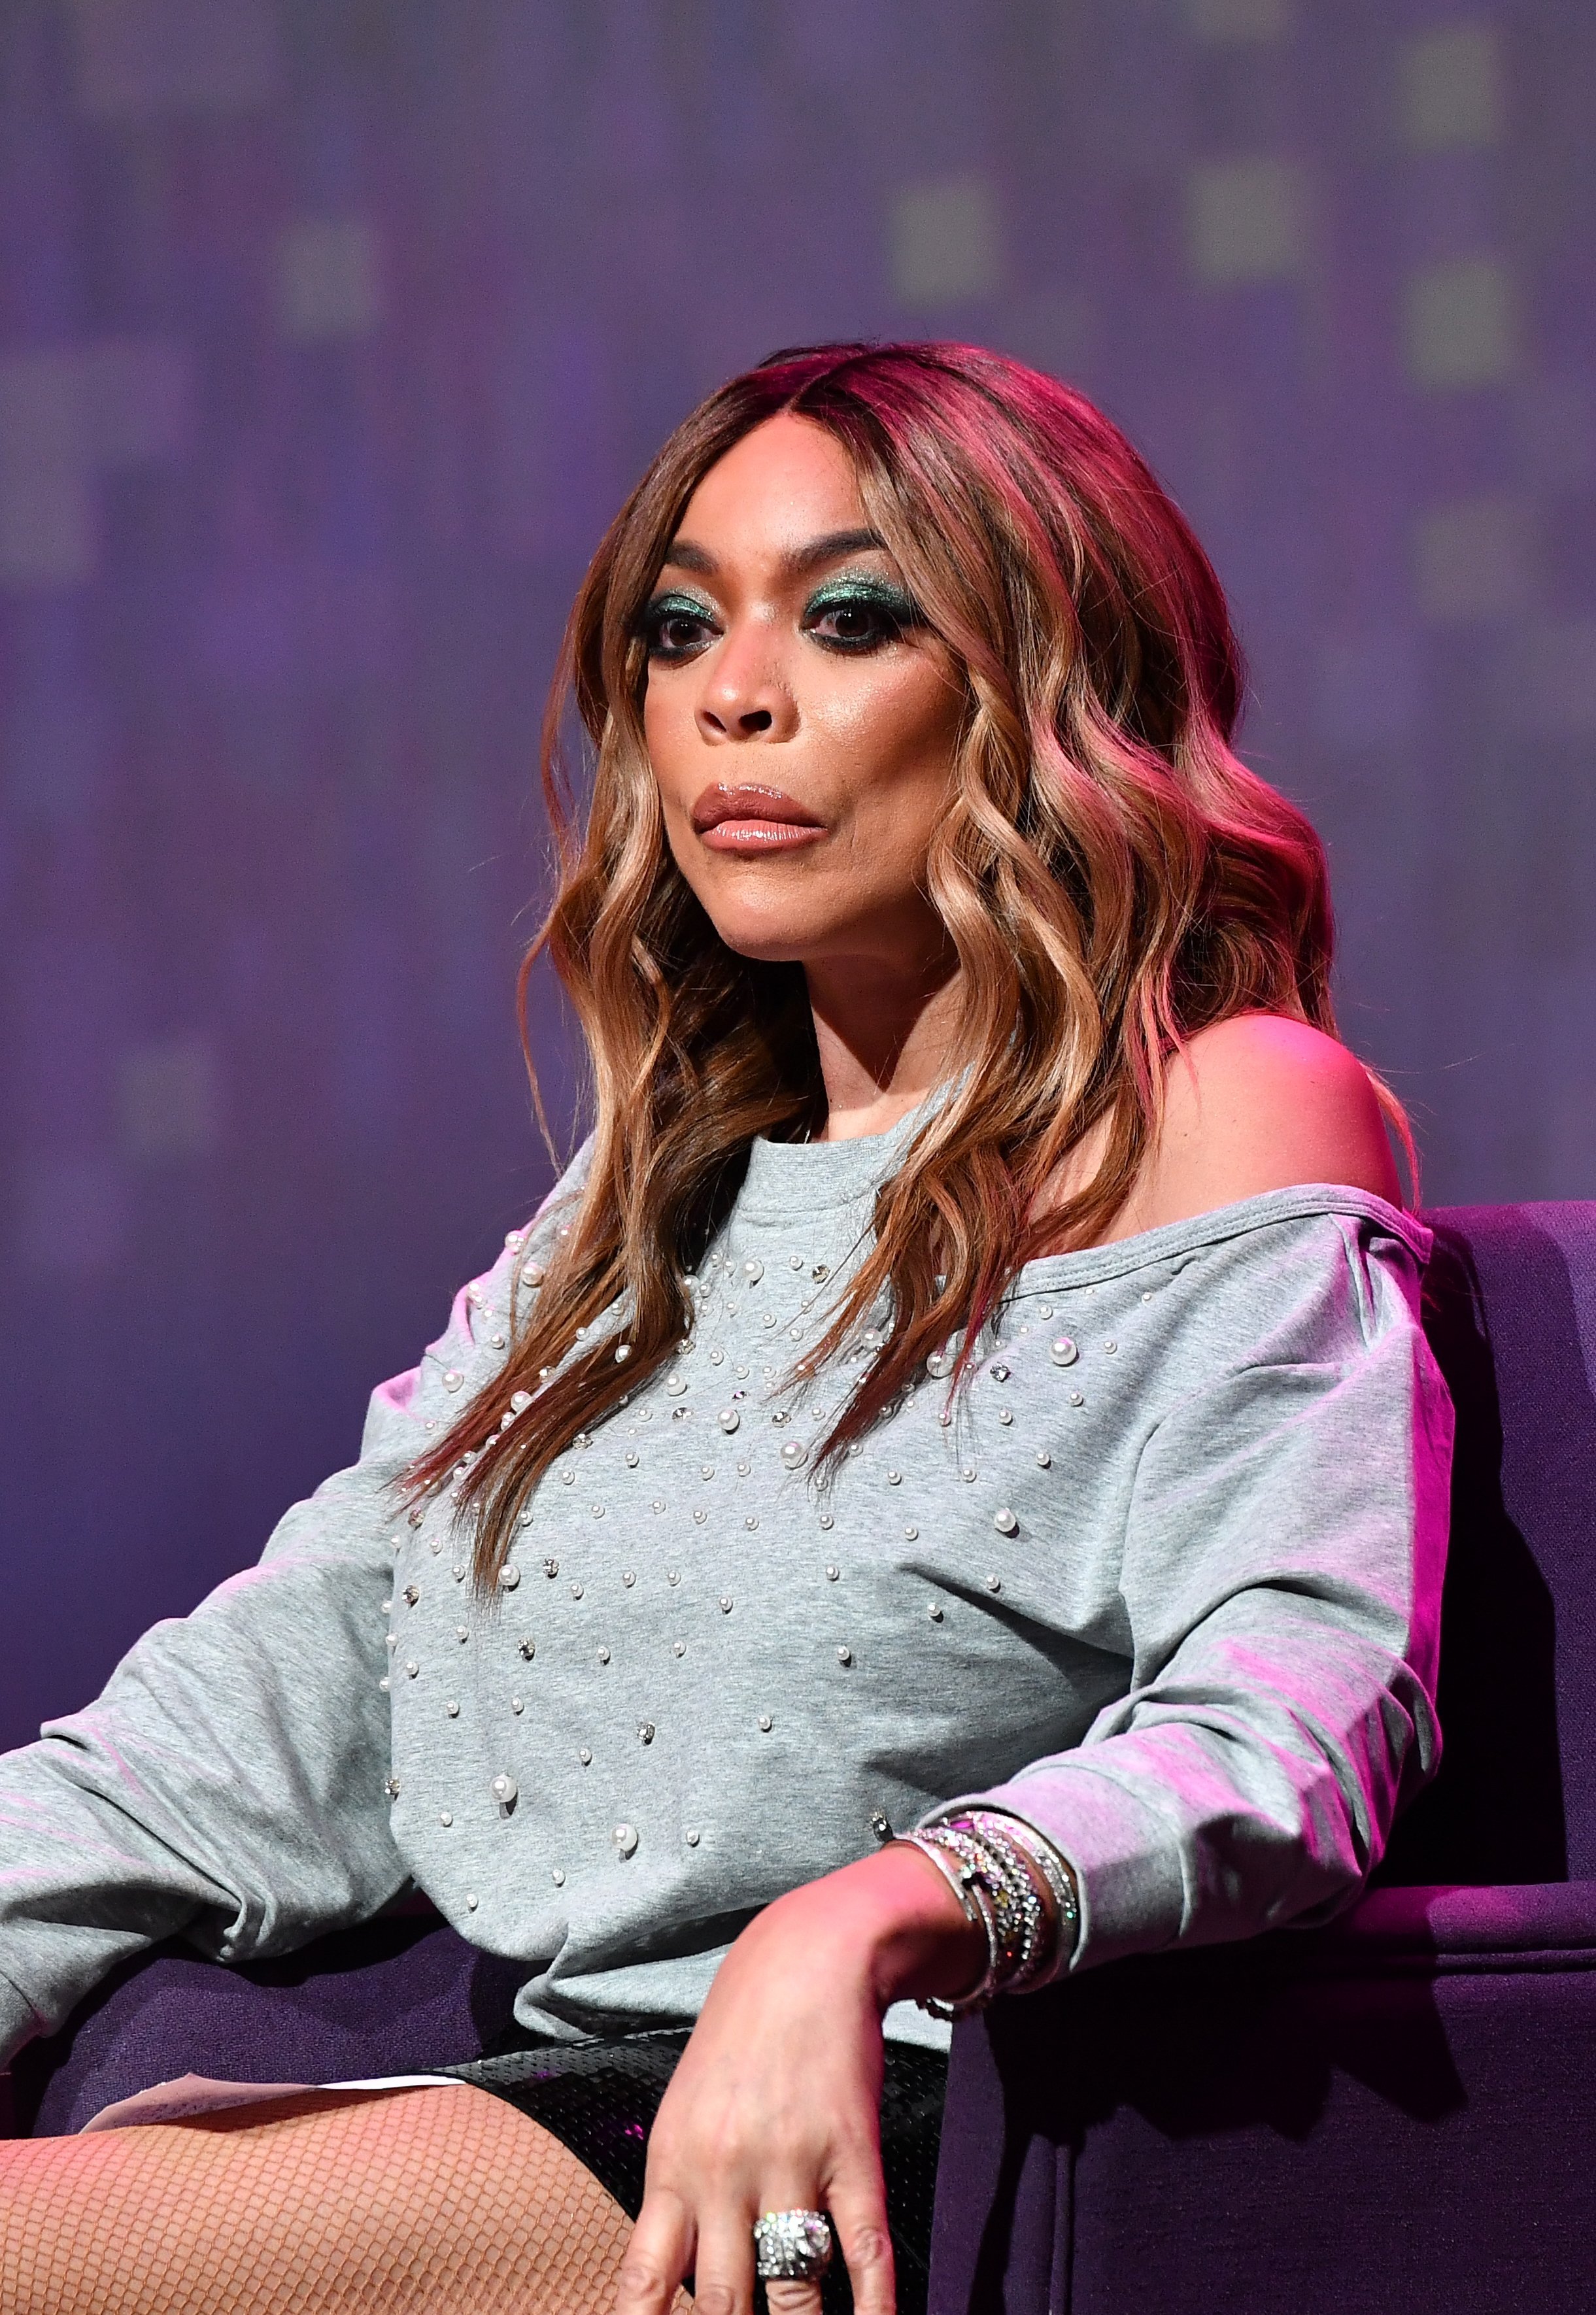 Wendy Williams at the celebration of 10 years of 'The Wendy Williams Show' on Aug. 16, 2018 in Georgia | Photo: Getty Images